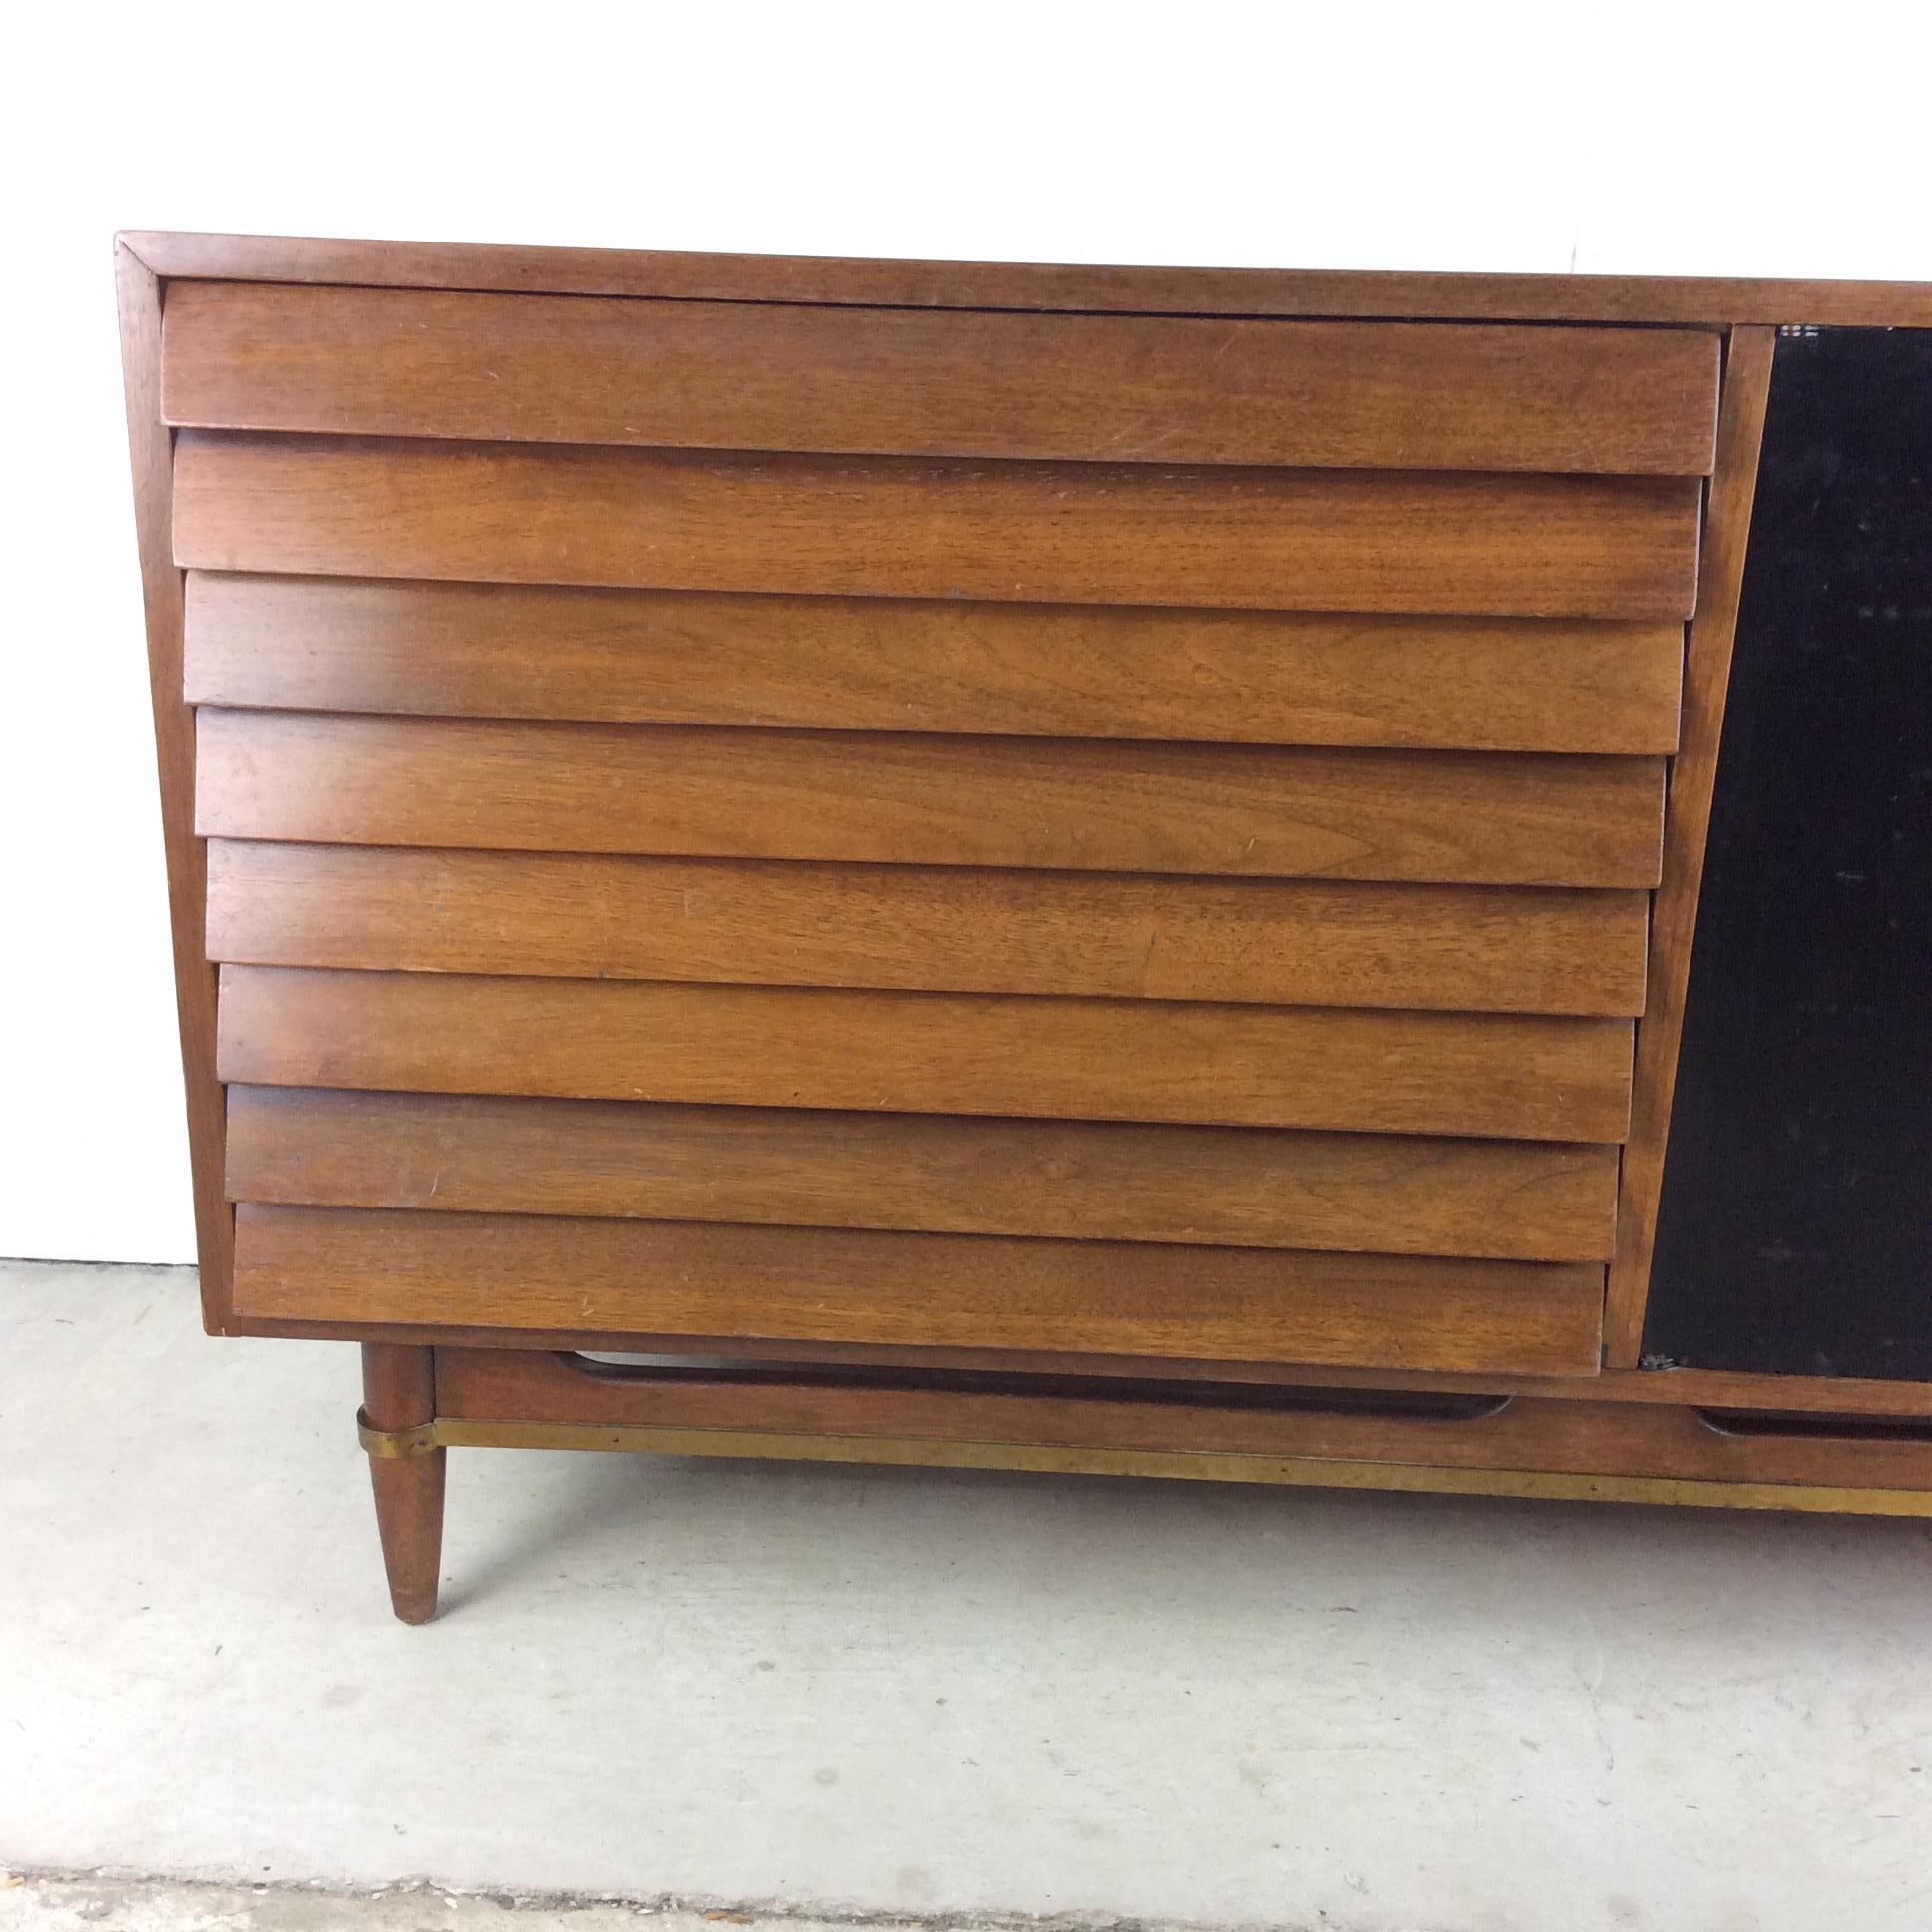 This Mid-Century Modern credenza from the Dania line by American of Martinsville features hardwood construction, walnut veneer with original finish, three large dovetailed drawers with louvered faces, black lacquered cabinet doors with three white